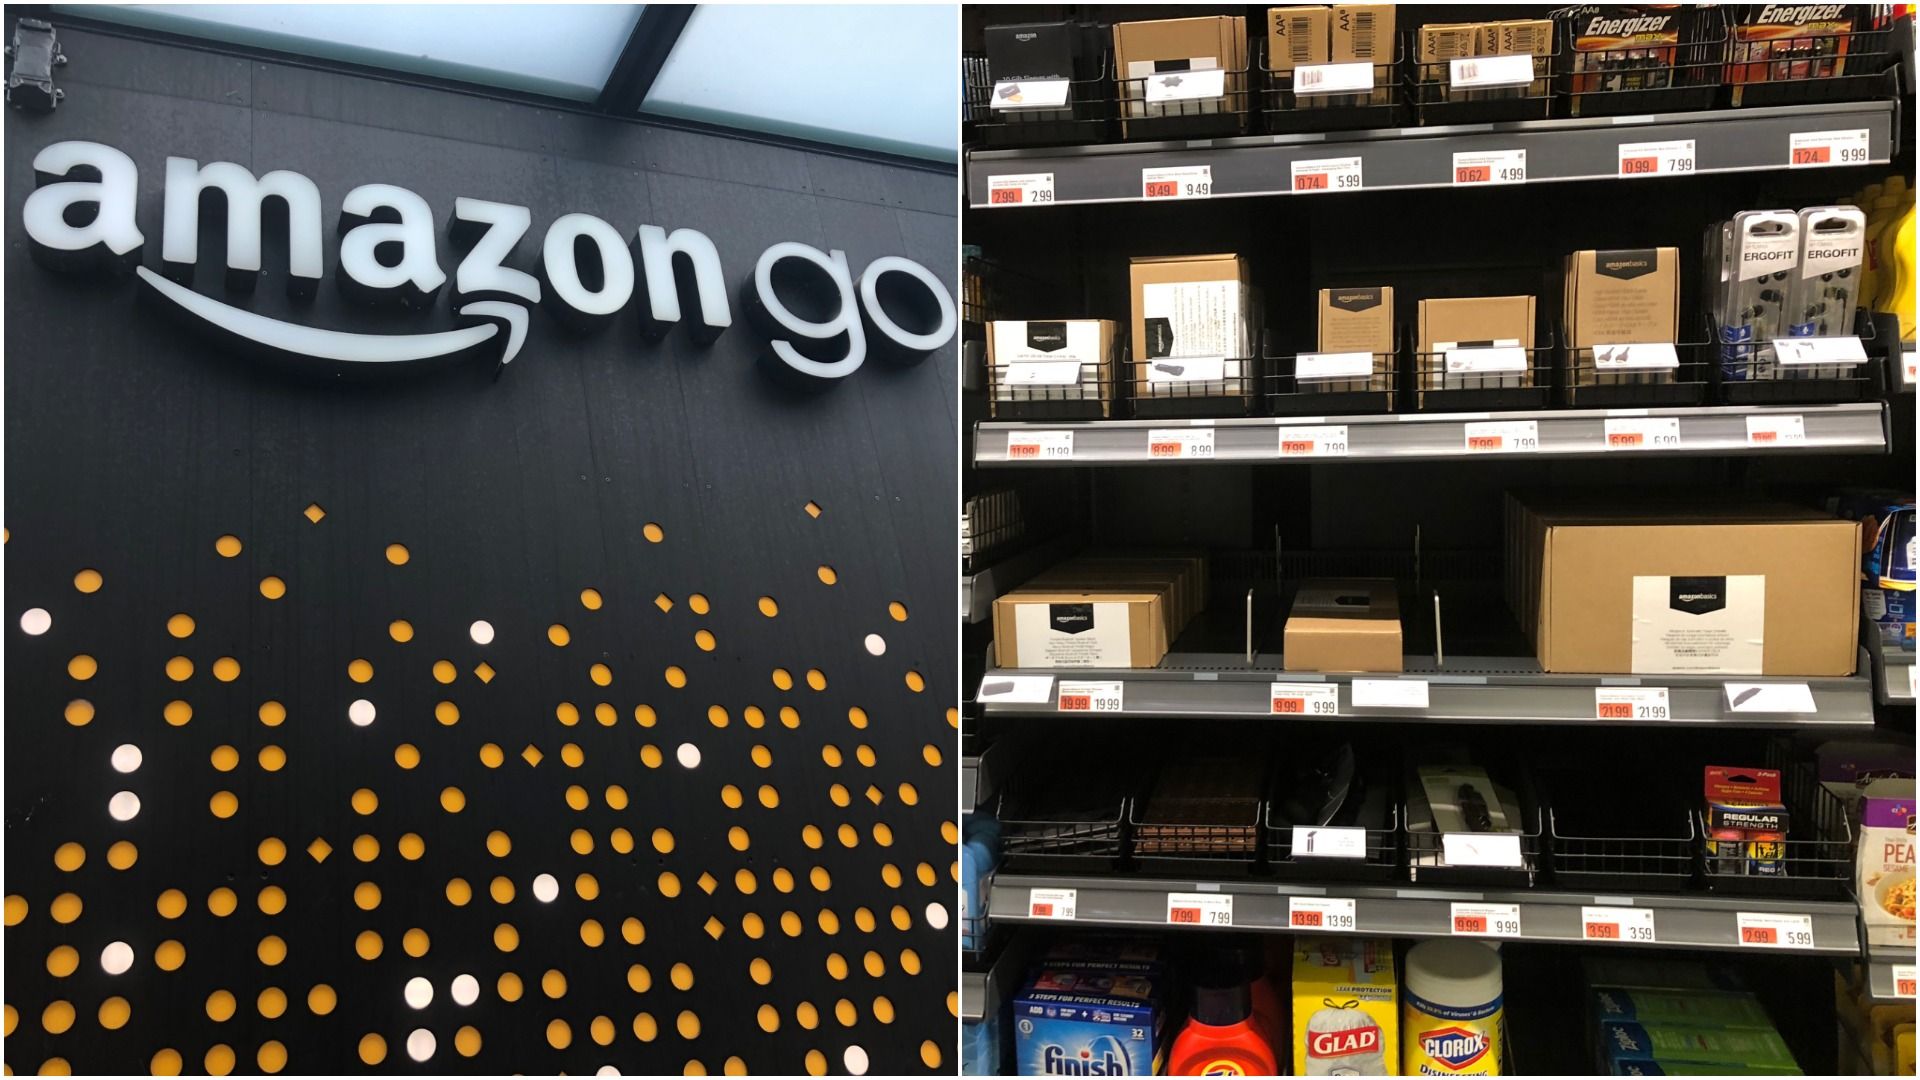 Split picture showing Amazon Go logo and shelves inside store